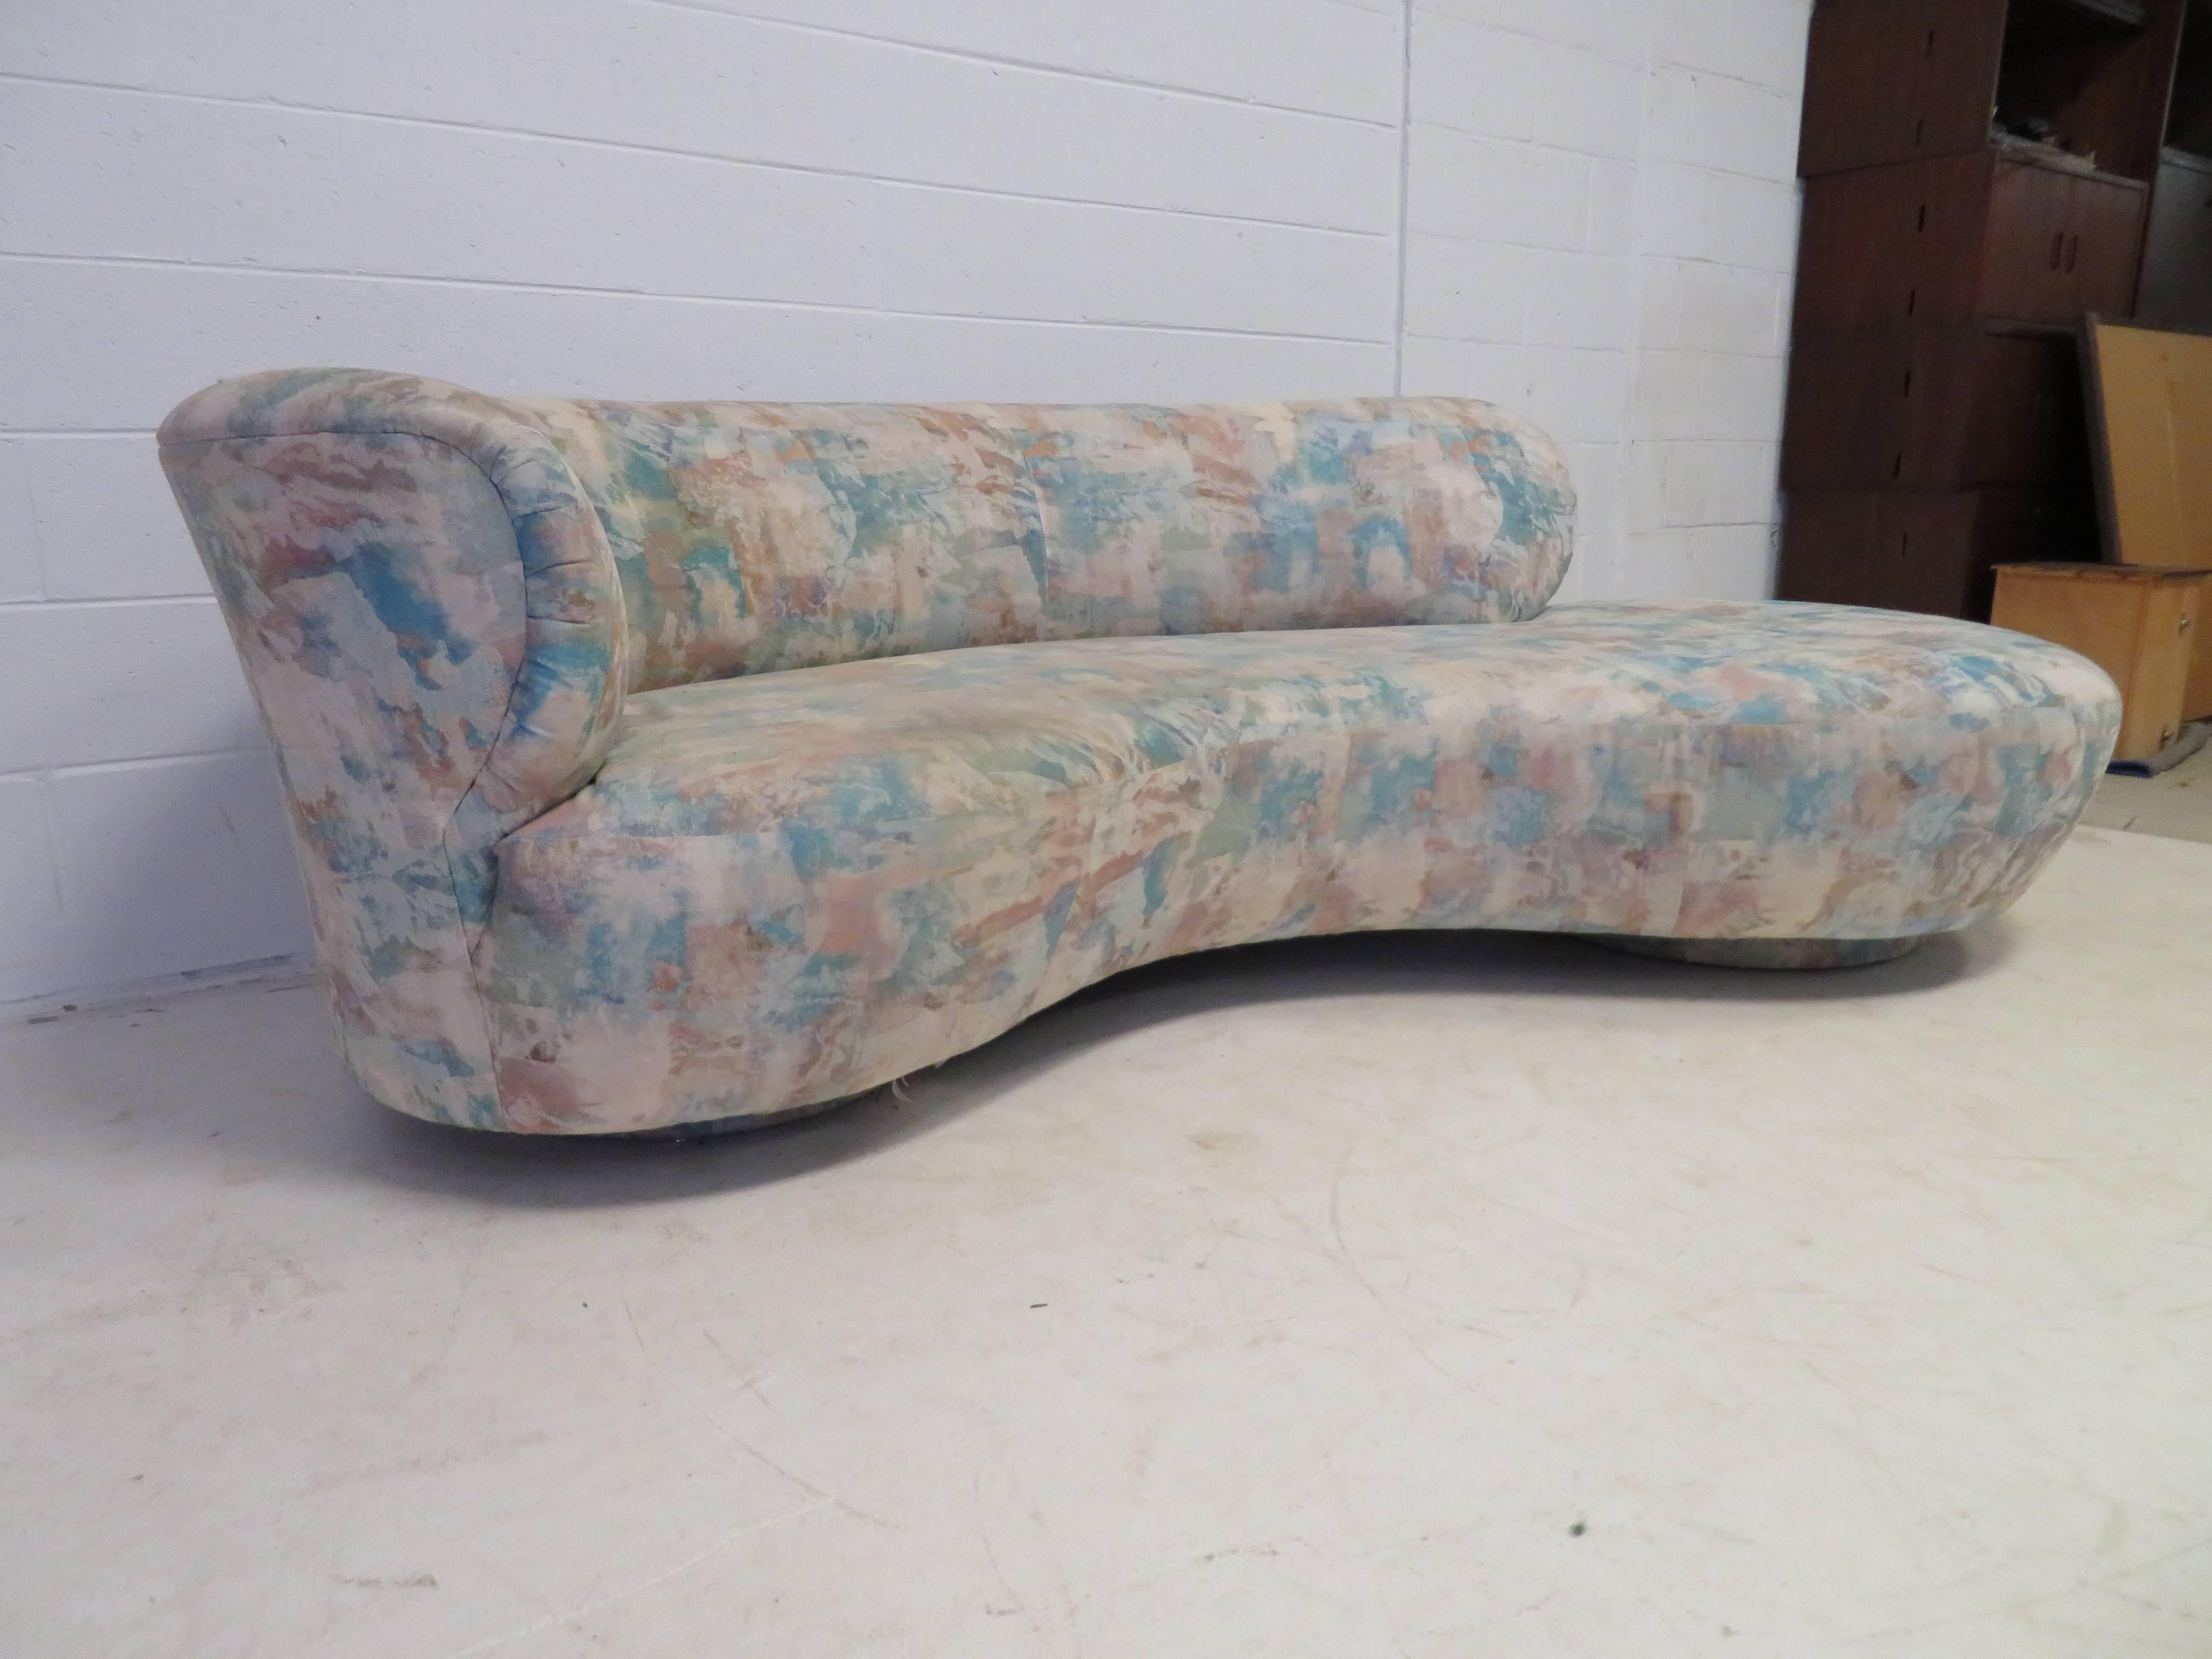 Lovely sculptural Mid-Century Modern free-form cloud curved sofa by Vladimir Kagan for Weiman Preview.